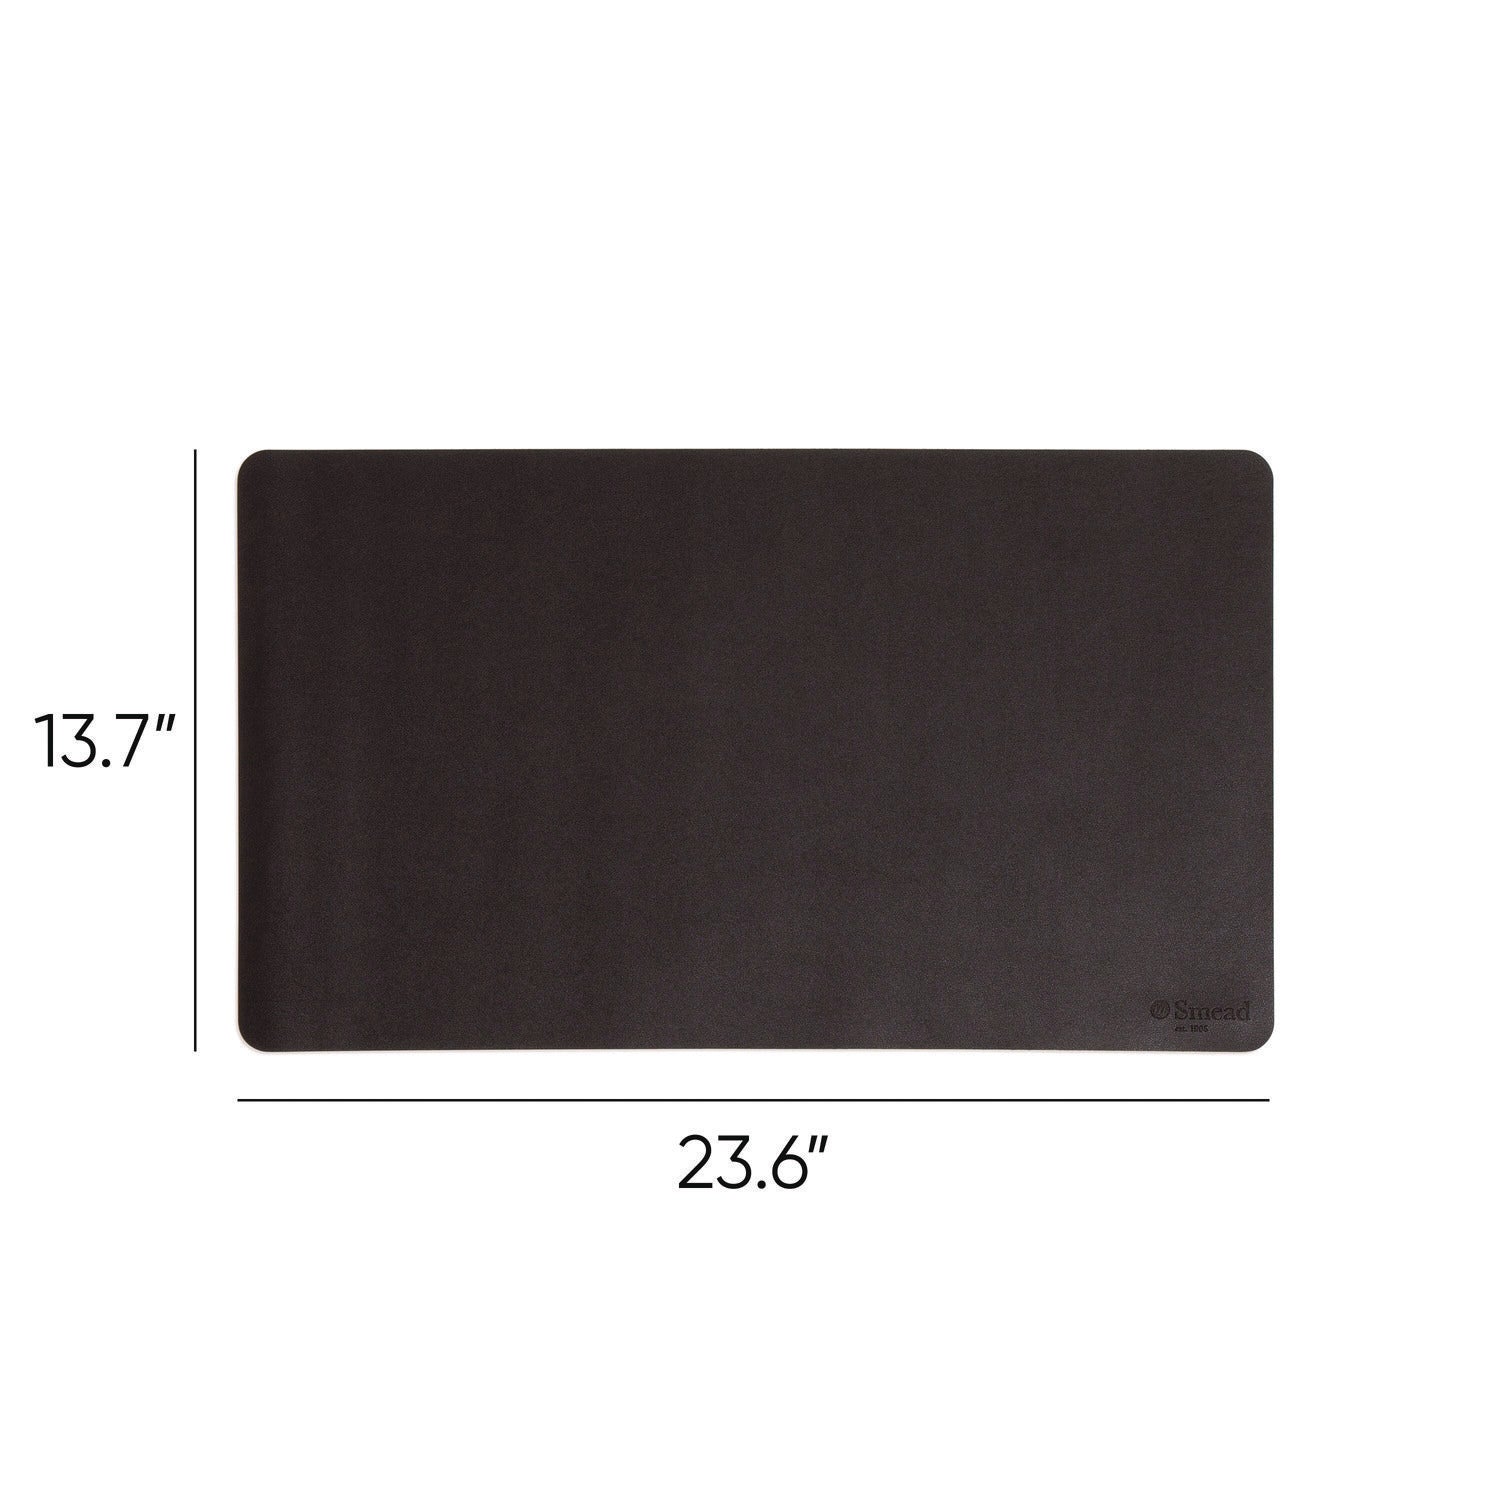 vegan-leather-desk-pads-236-x-137-charcoal_smd64838 - 2